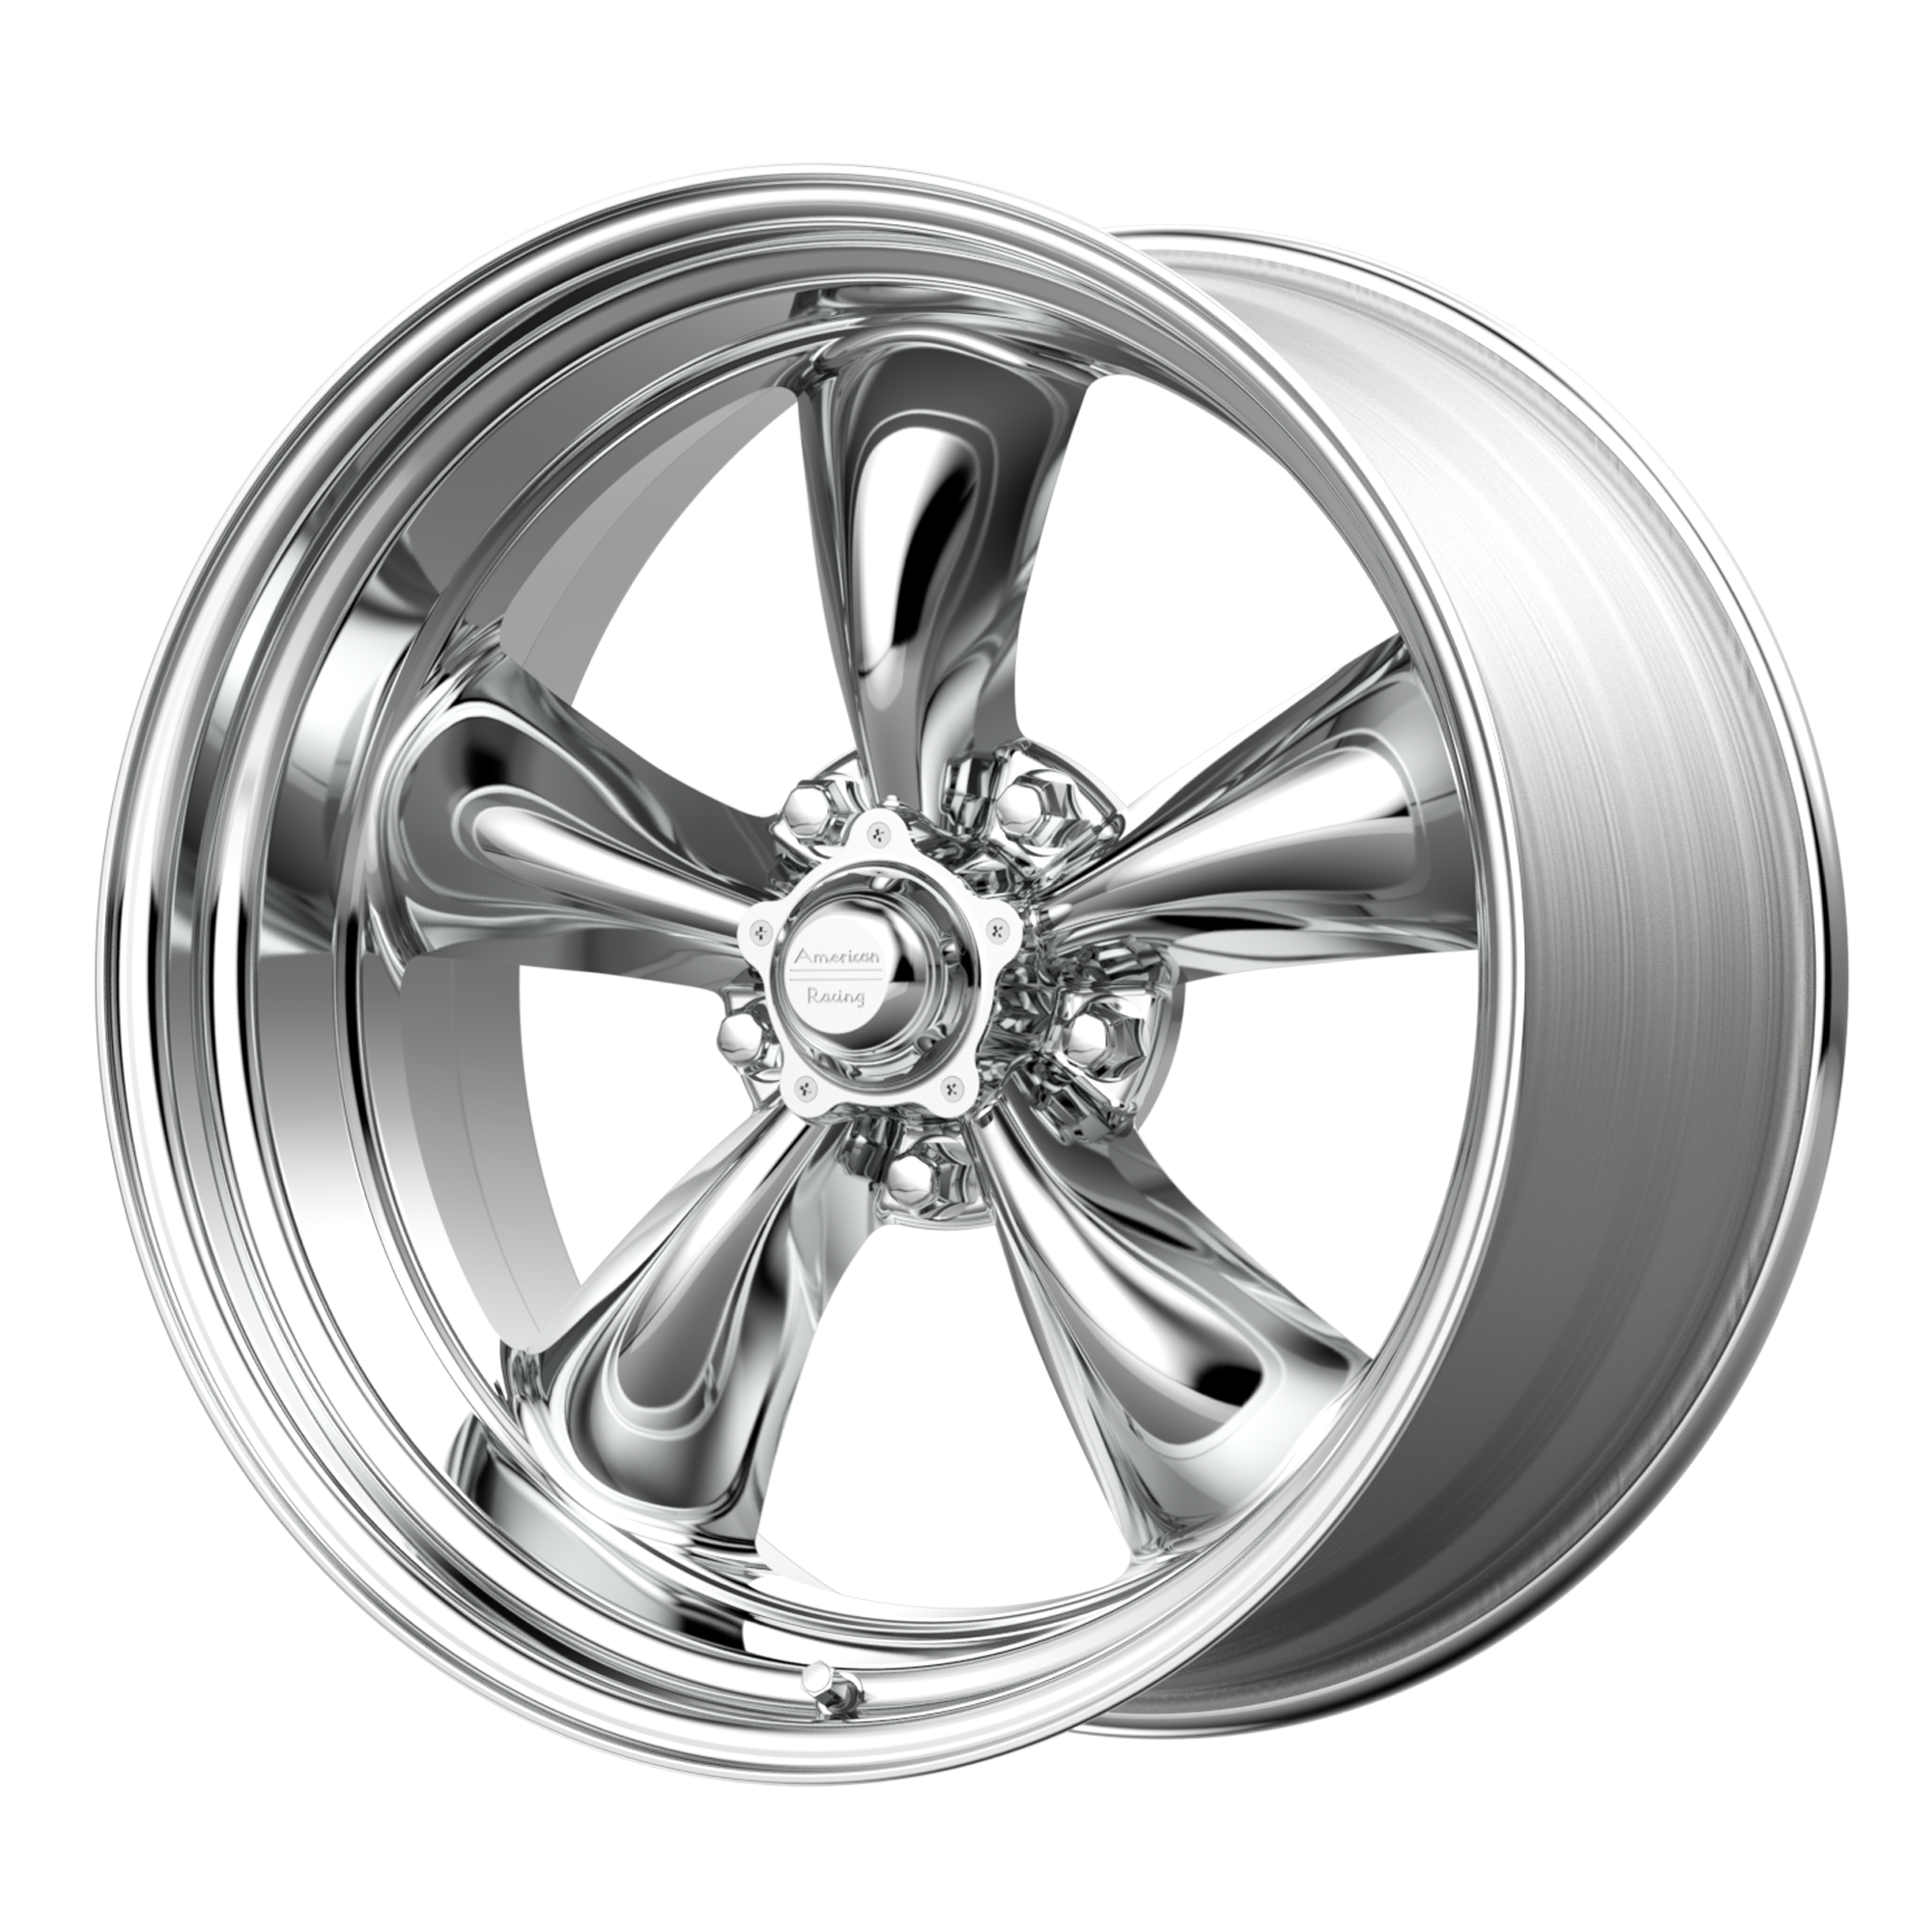 TORQ THRUST II 1 PC 17x9.5 5x120.65 POLISHED (46 mm) - Tires and Engine Performance